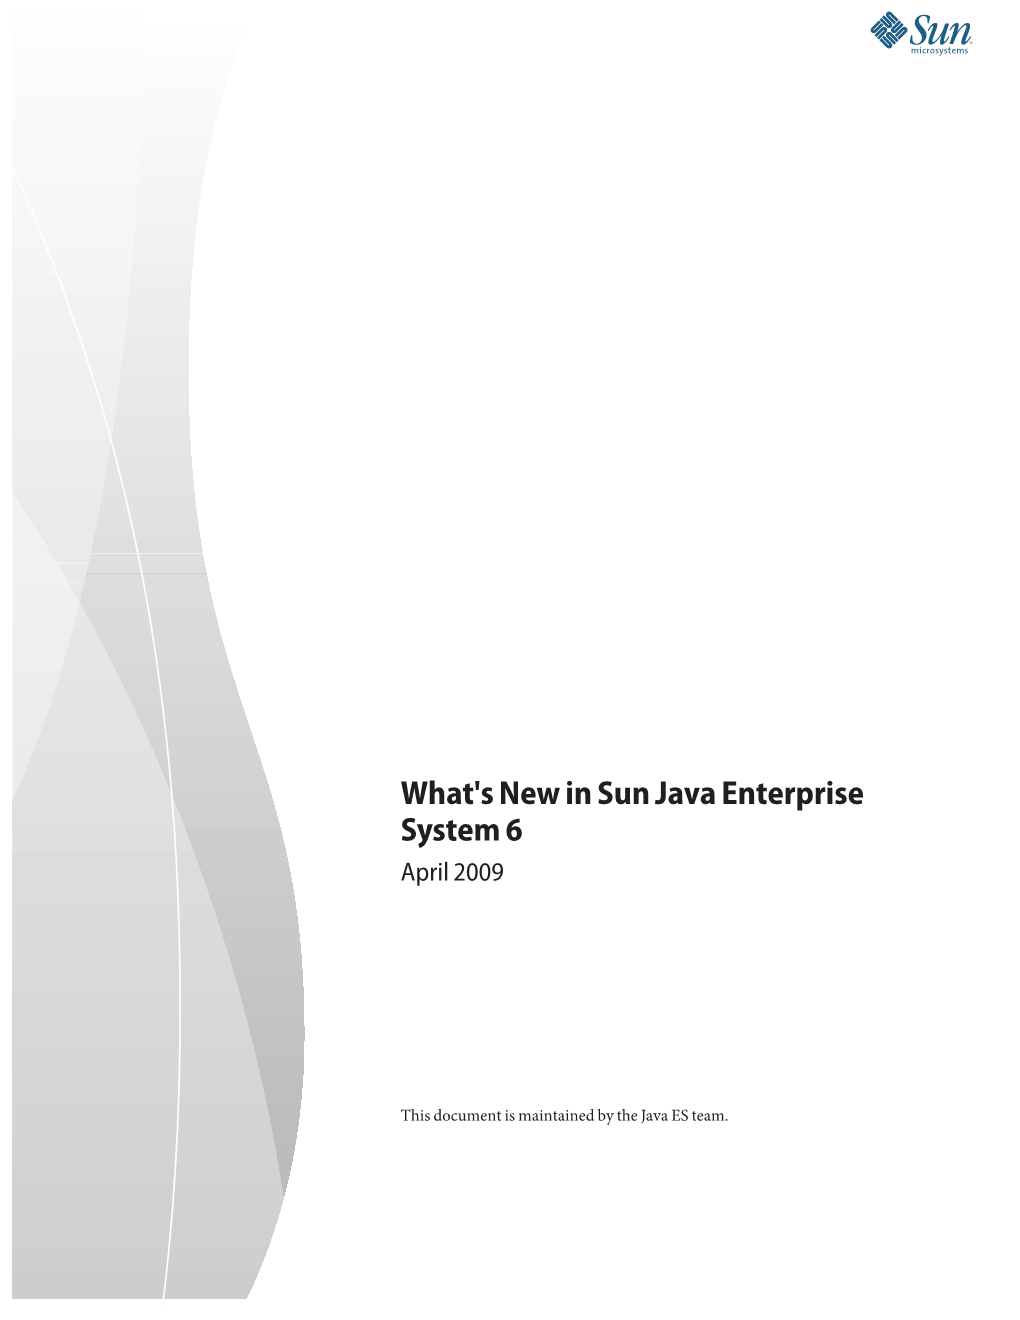 What's New in Sun Java Enterprise System 6 April 2009